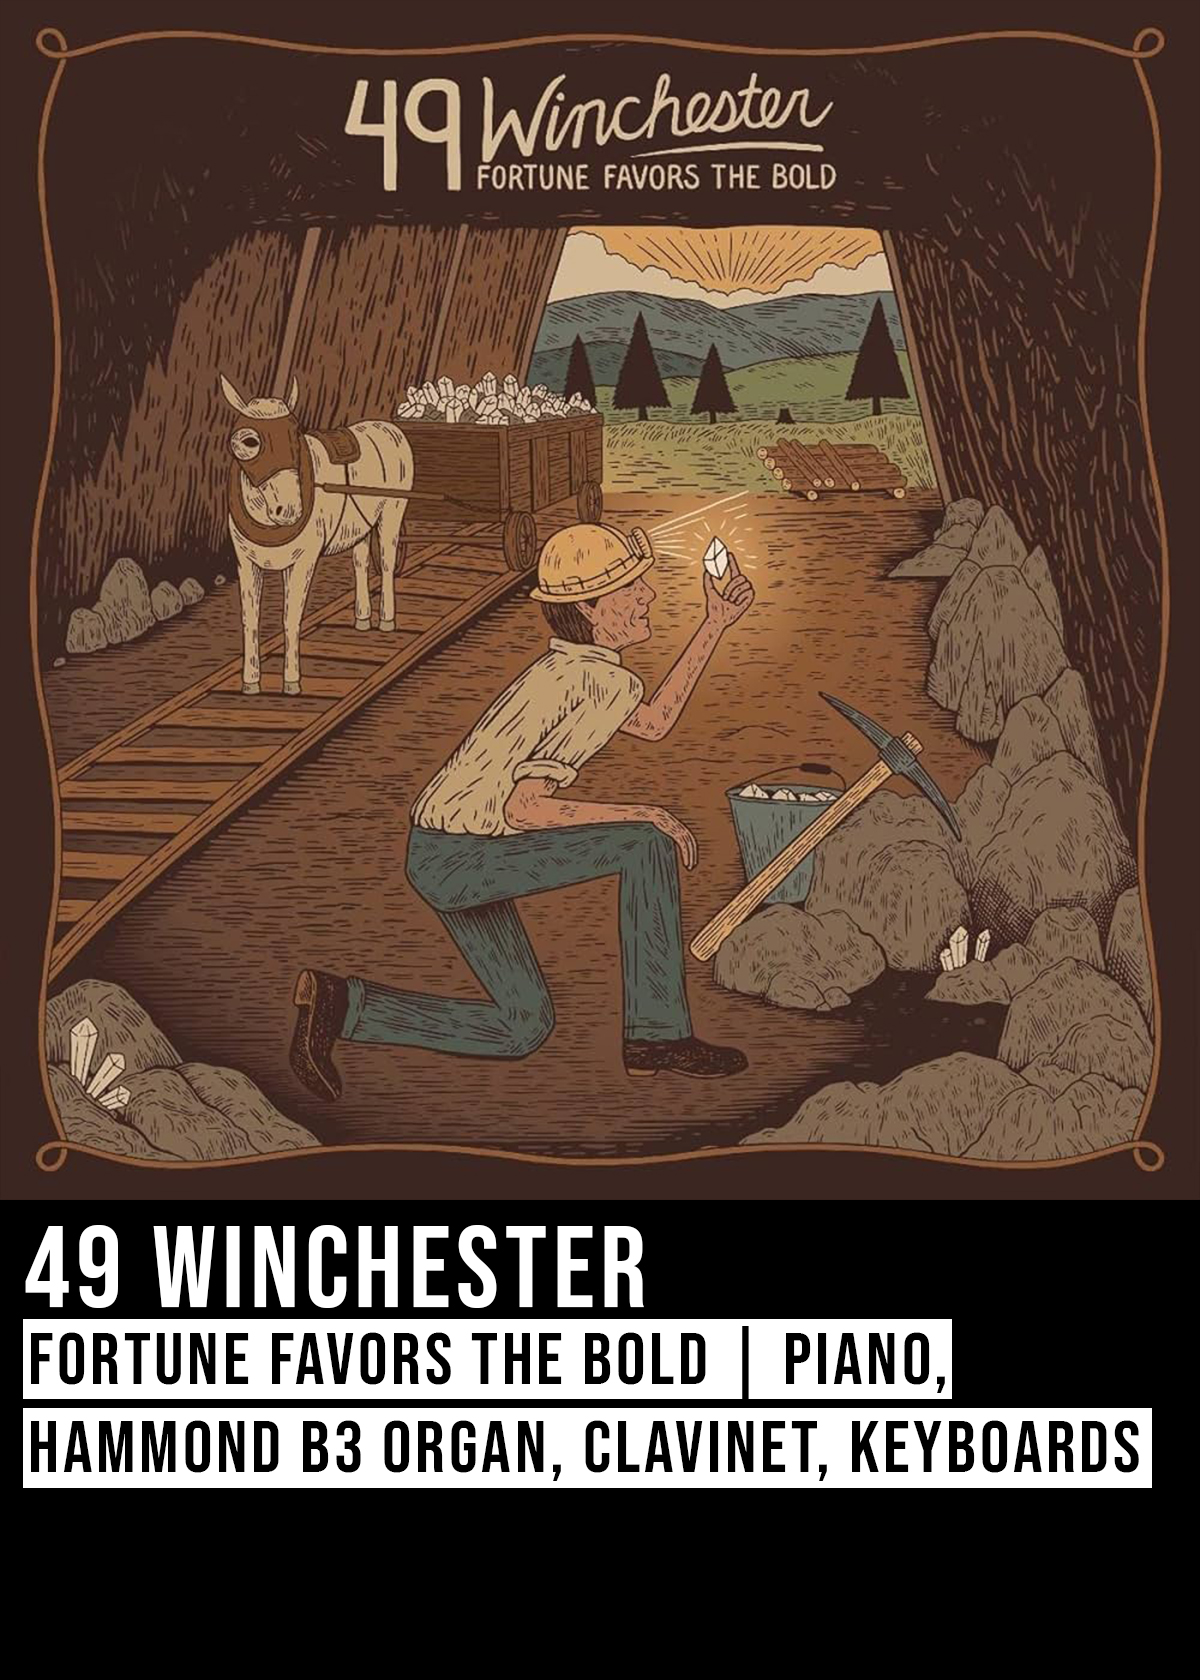 49 Winchester Don Eanes Organ Hammond B3 Piano Clavinet Floyd Fest Fortune Favors The Bold